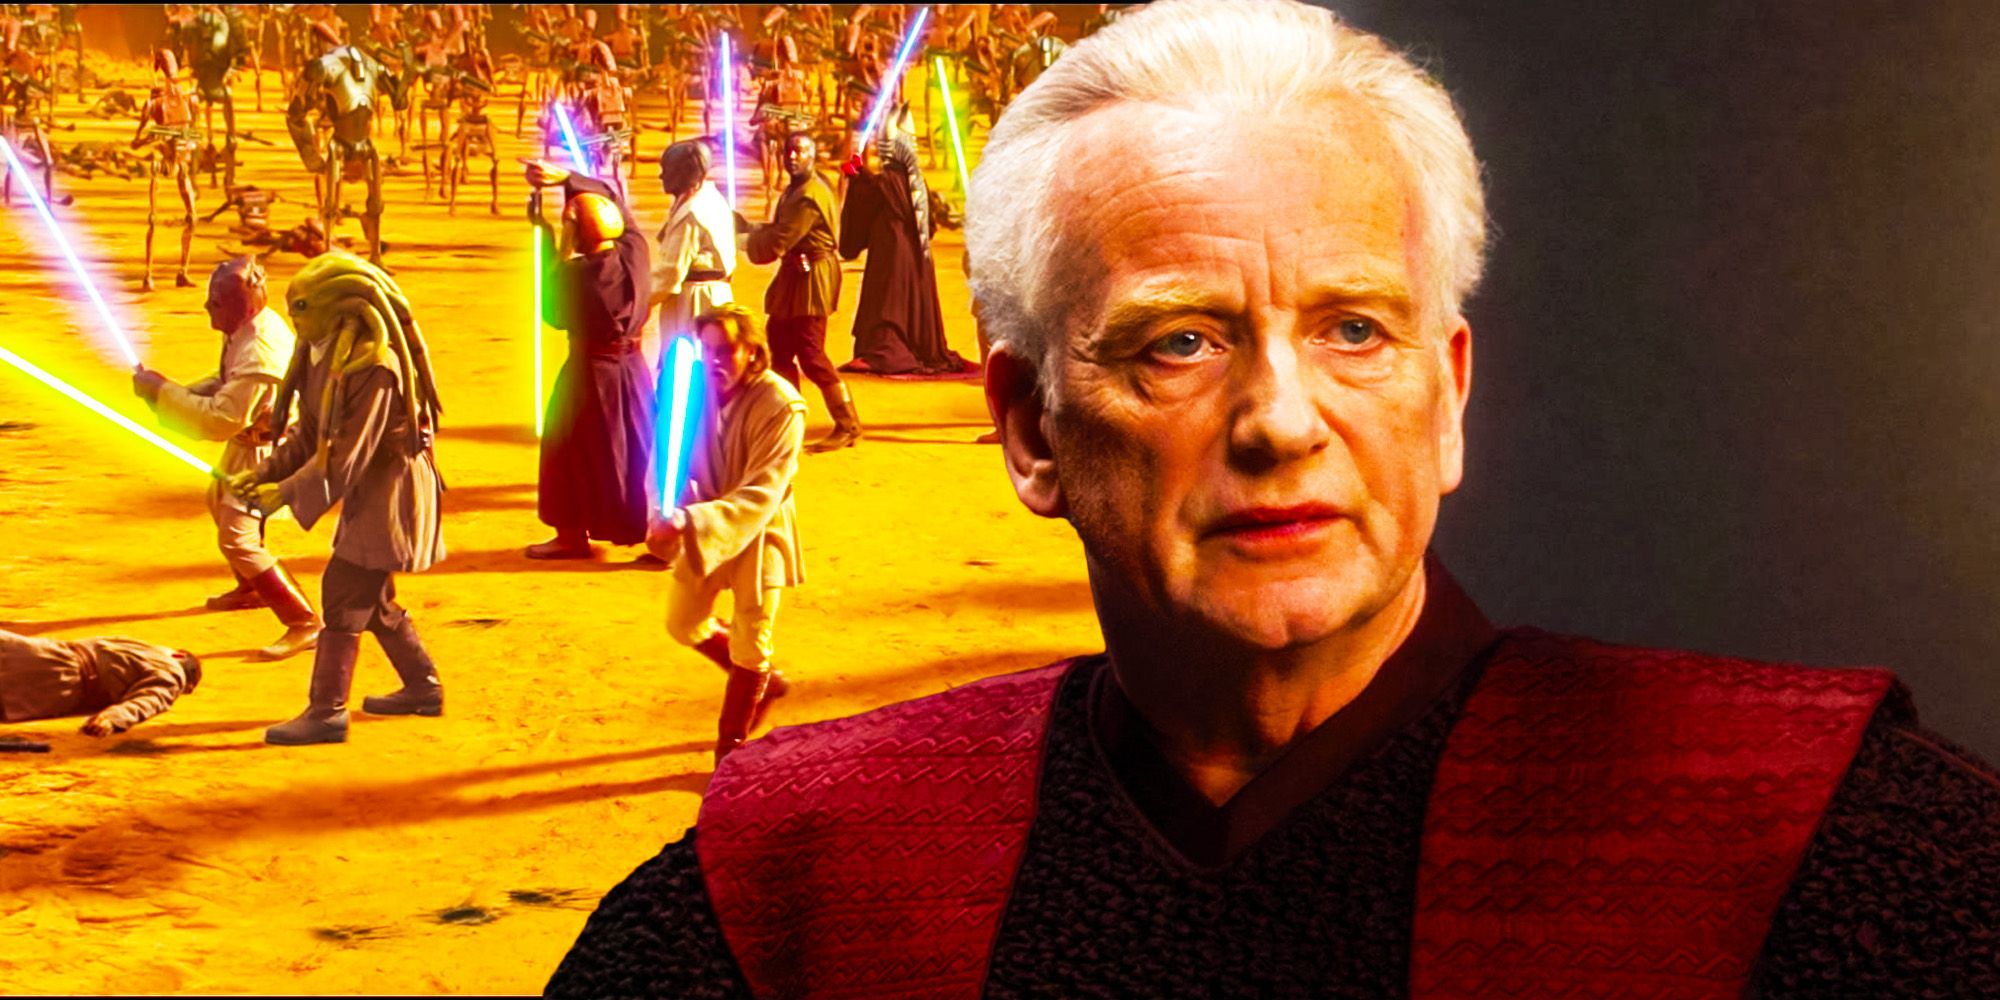 Palpatine in star wars revenge of the sith and the jedi fighting on geonosis in attack of the clones